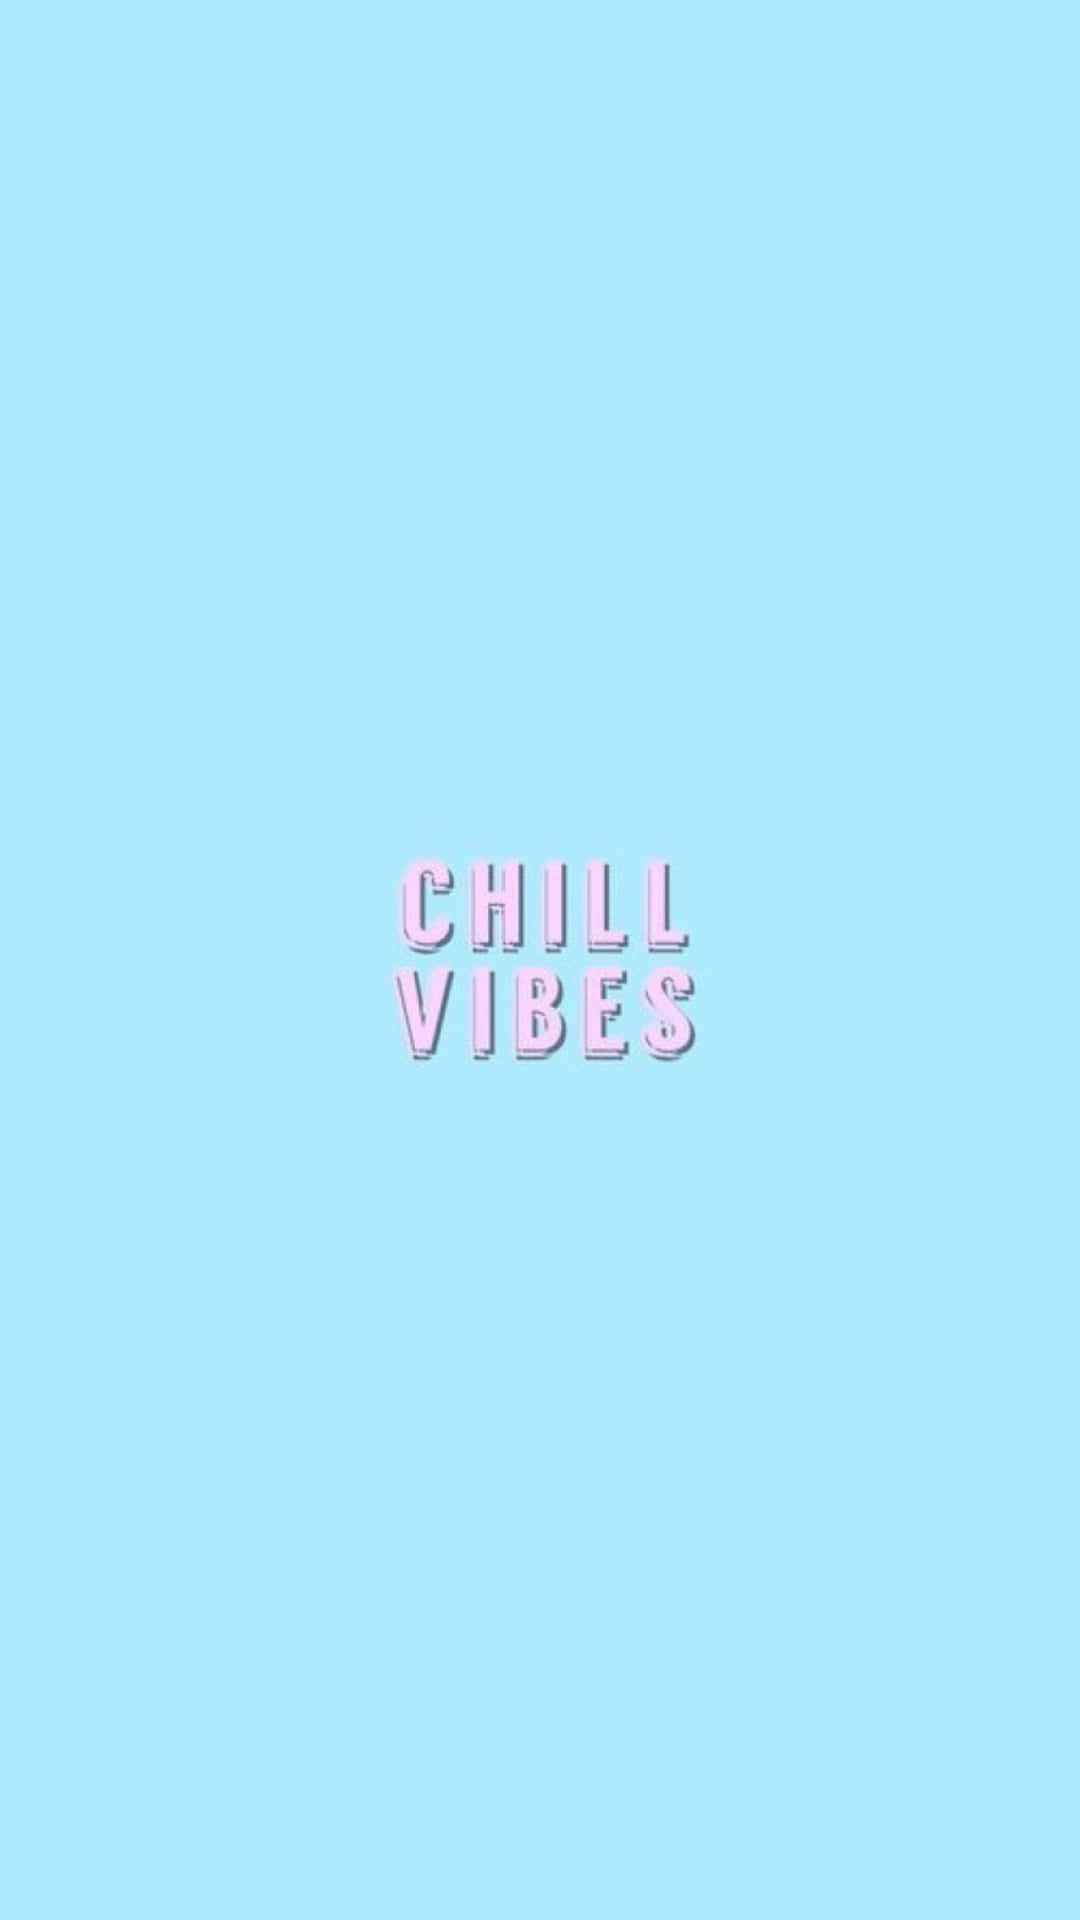 Feel the Vibes with this iPhone wallpaper! Wallpaper